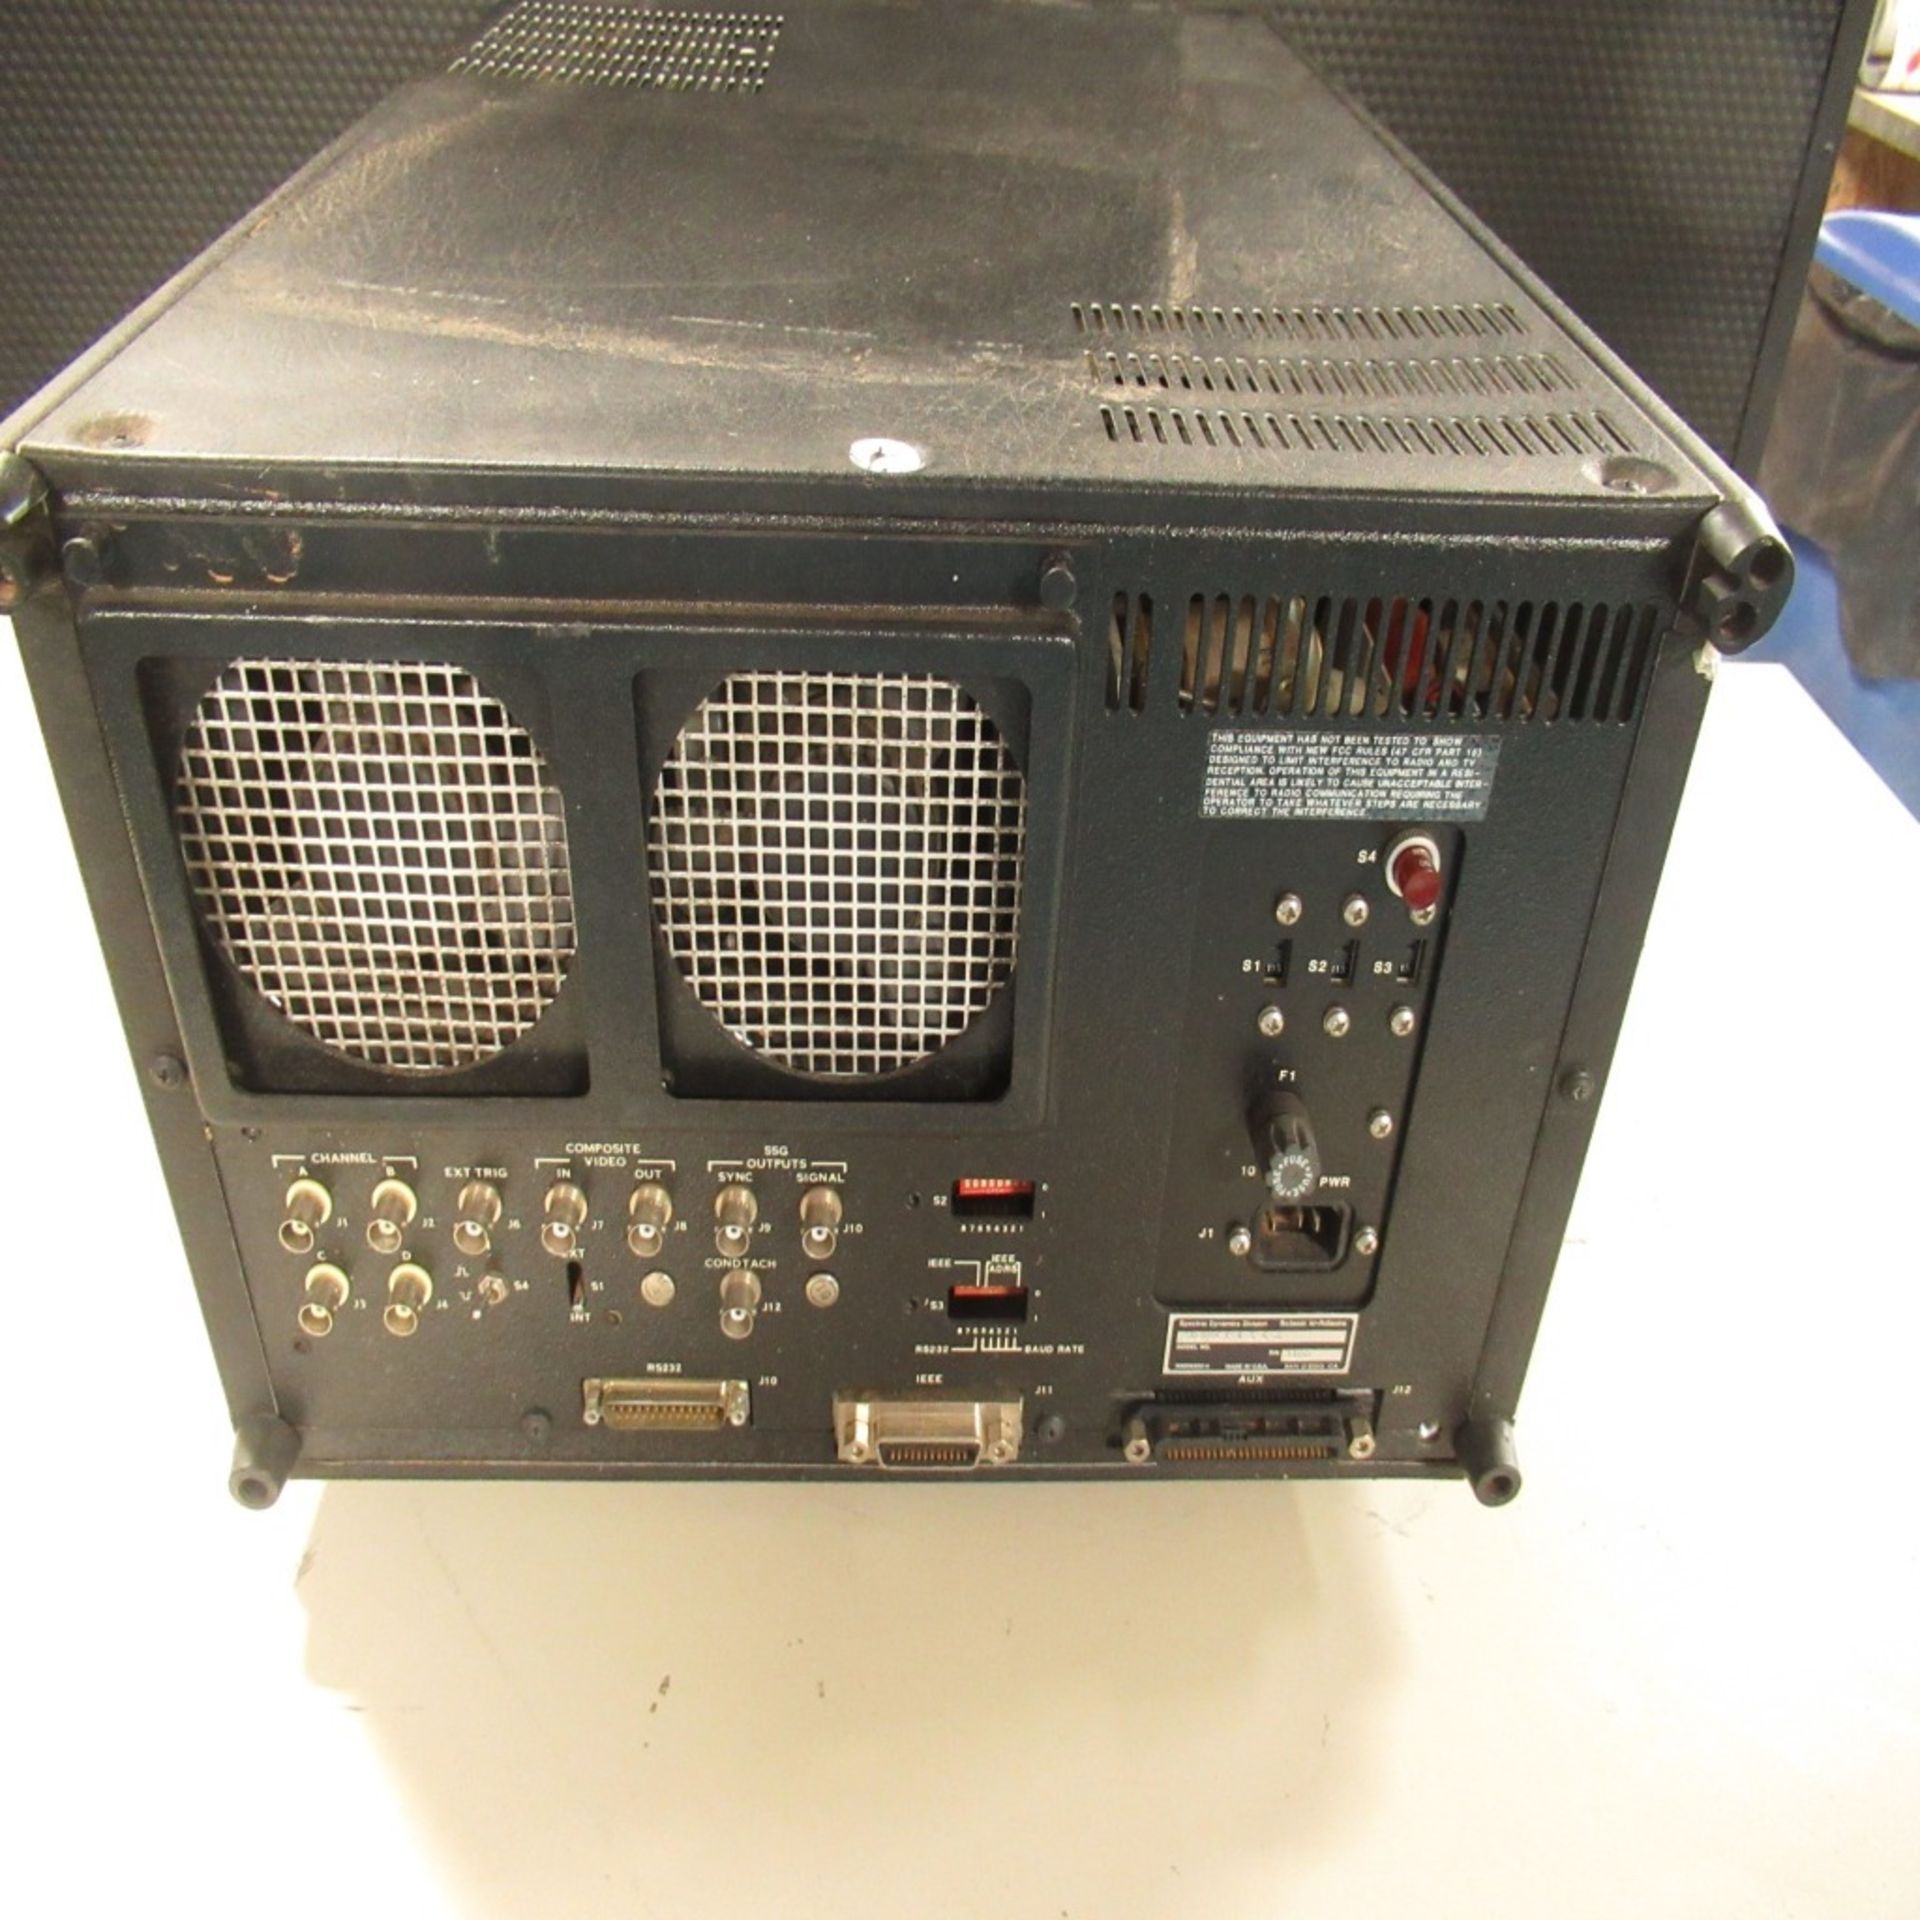 PHOTON SNAP SHOT MODEL 6000 *POWERS ON* NO SCREEN DISPLAY; FARNELL AP20-80 REGULATED POWER SUPPLY * - Image 64 of 222